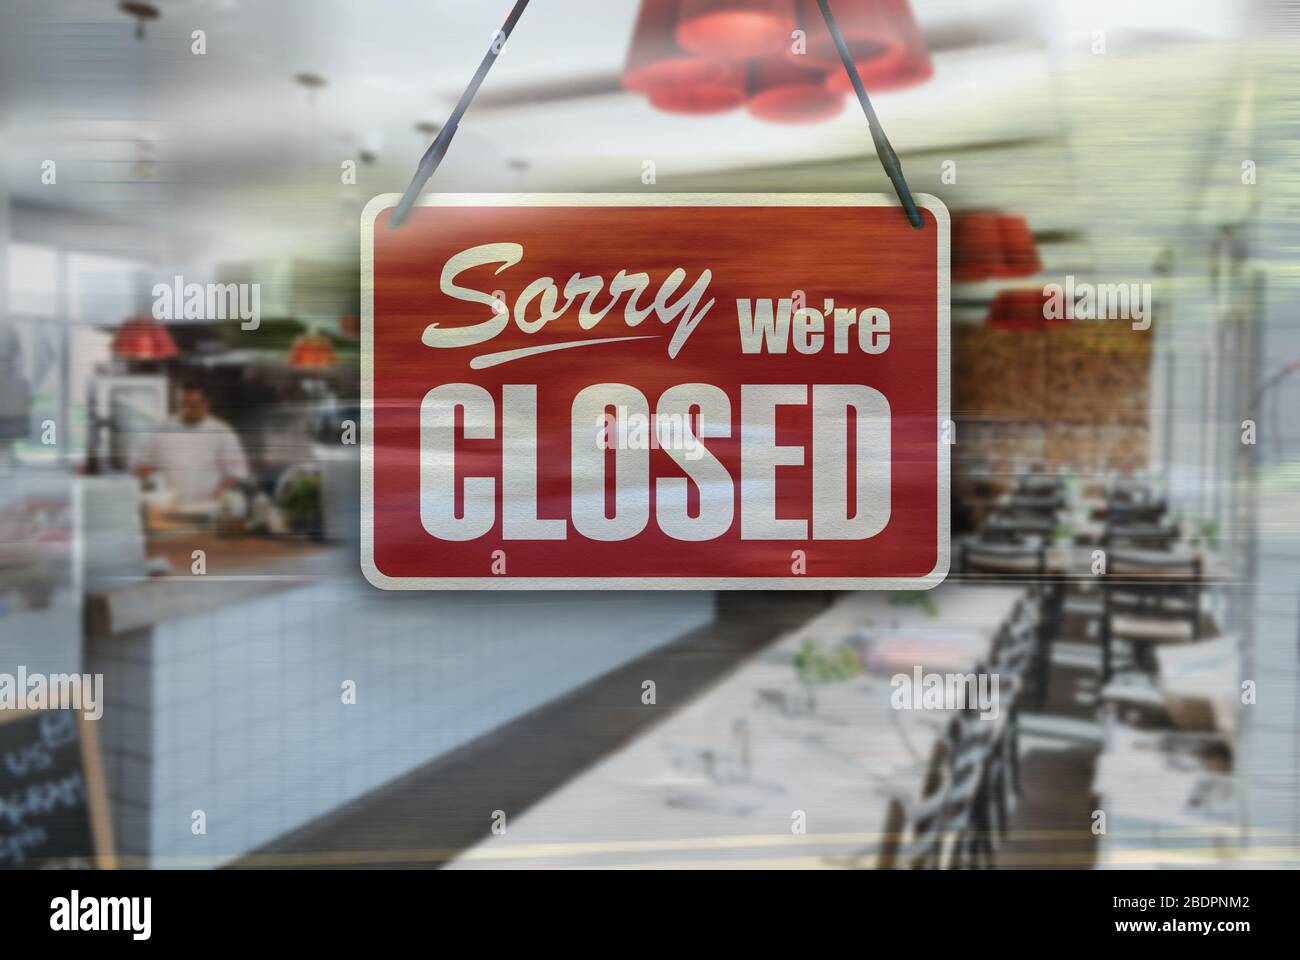 A business sign that says 'Sorry, We're Closed' on Cafe / Restaurant window. Stock Photo